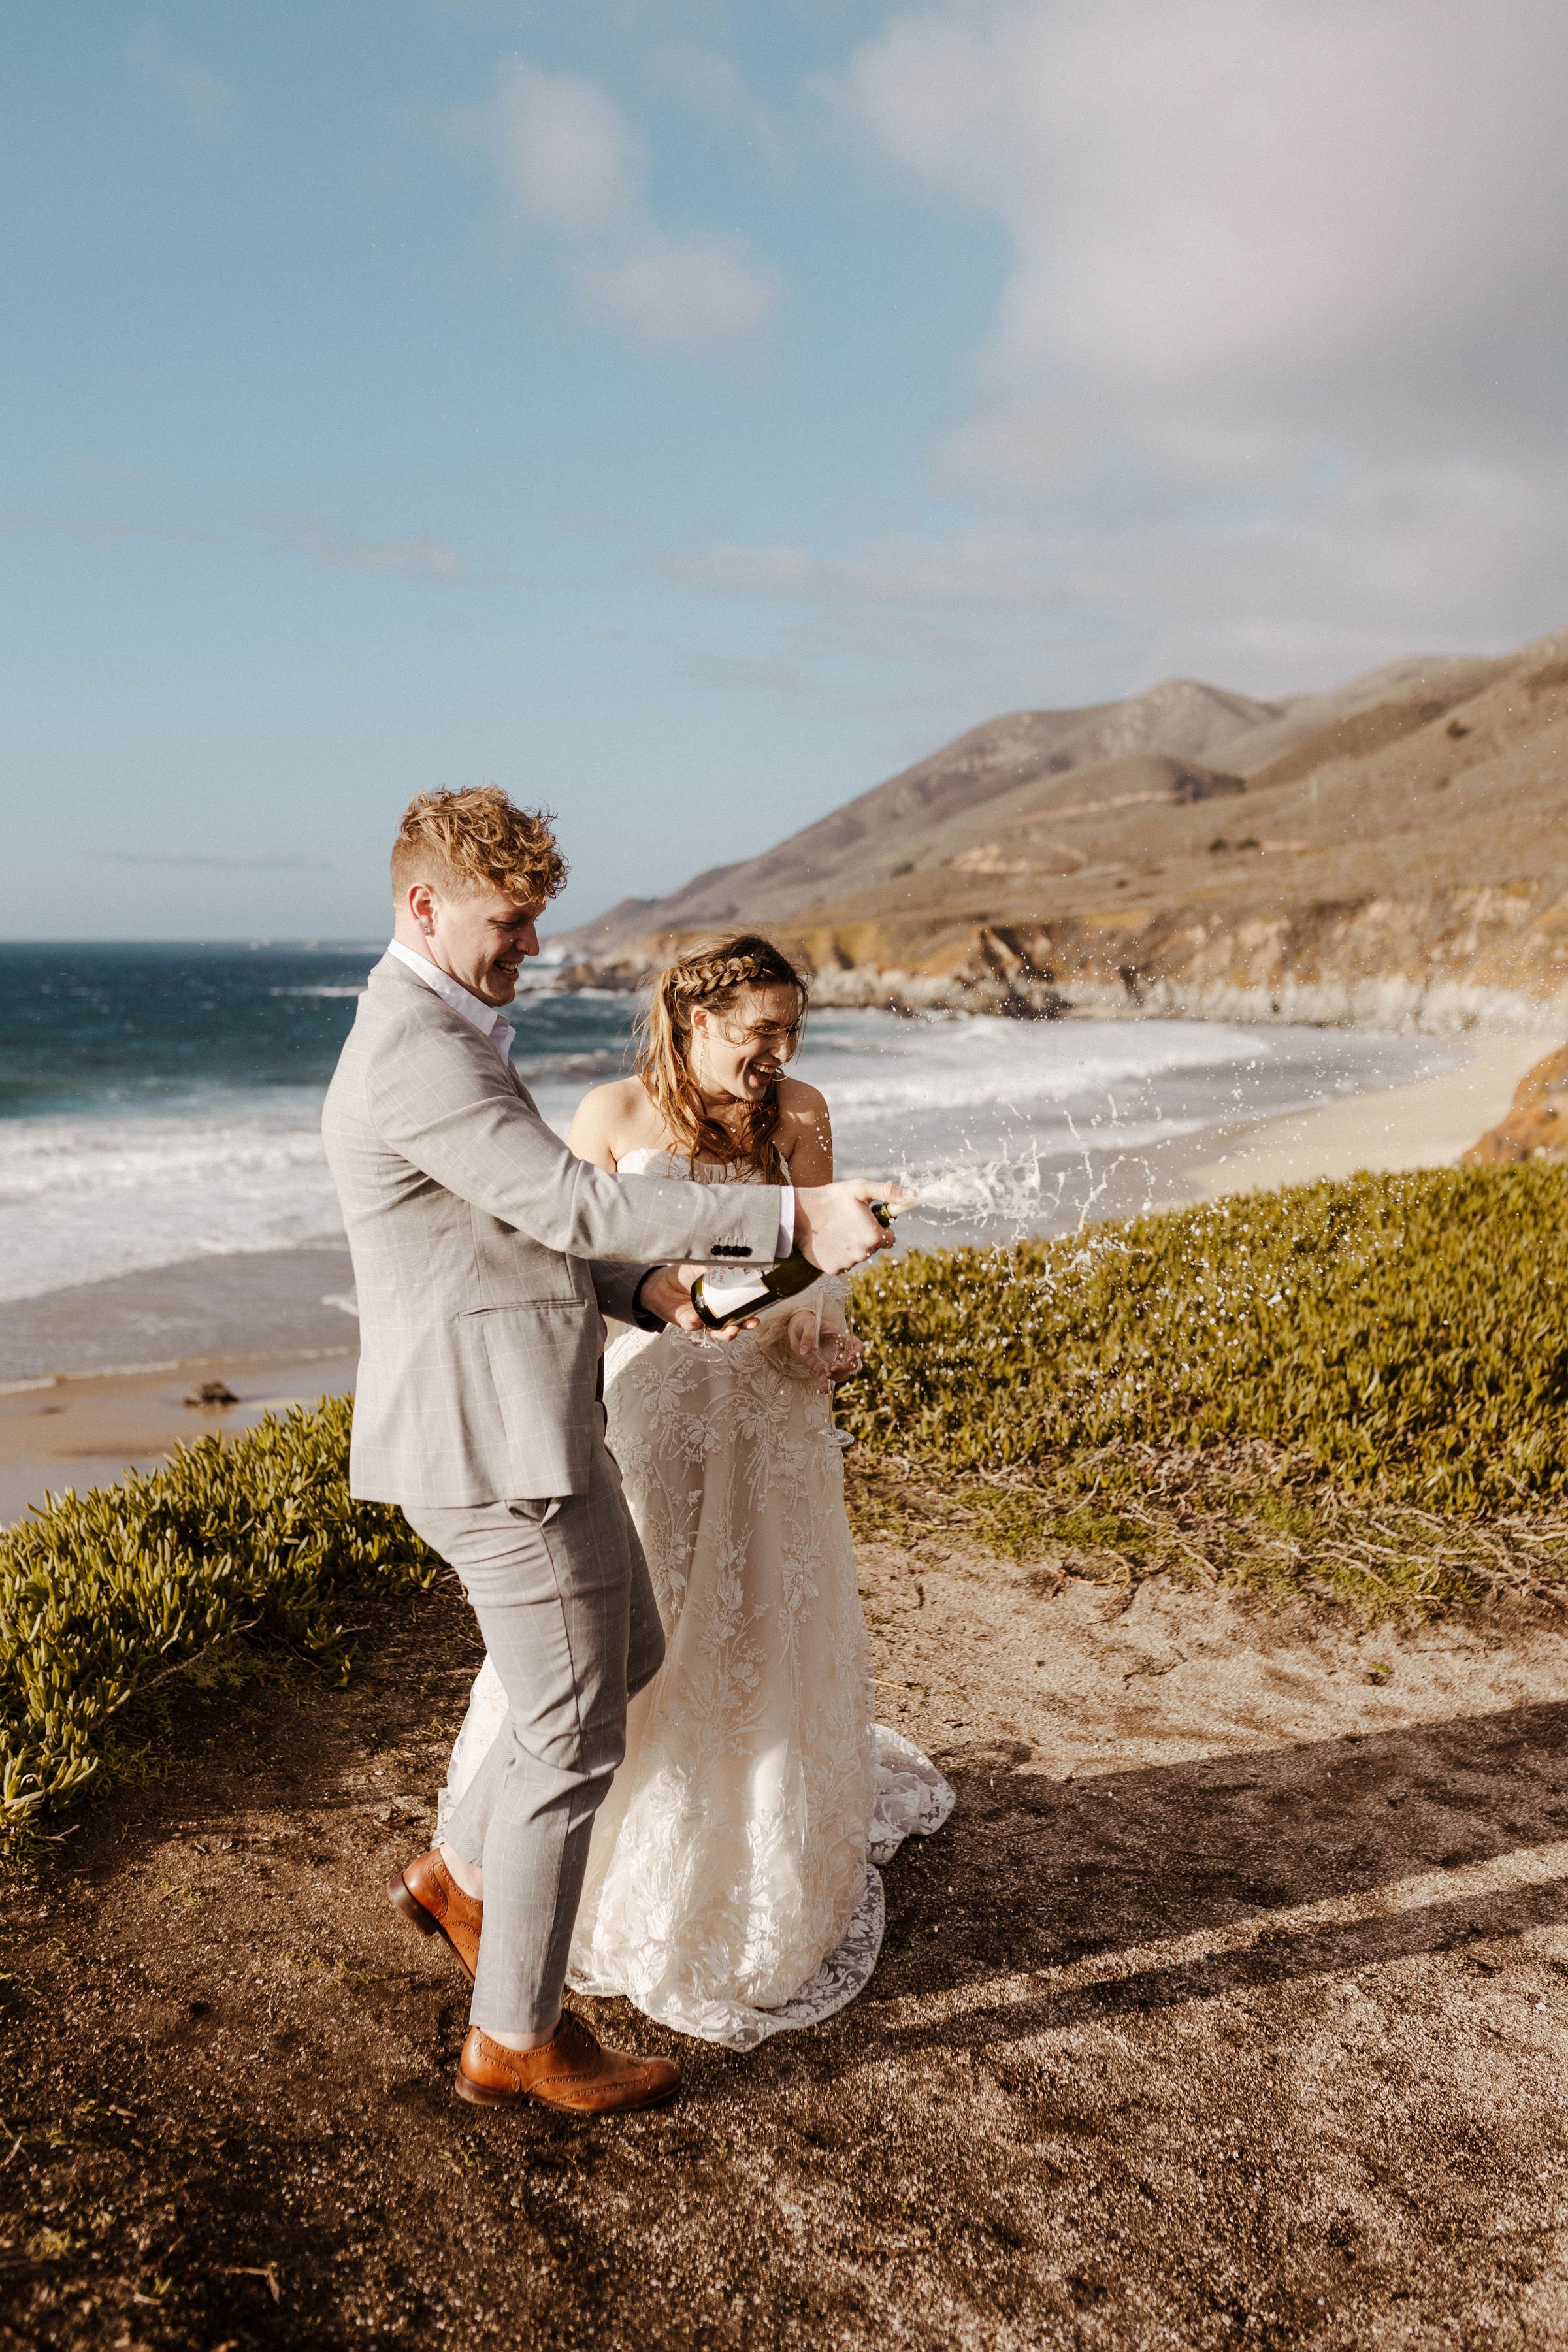 romantic bottle popping moment with the wedding couple in this oceanside elopement styled shoot